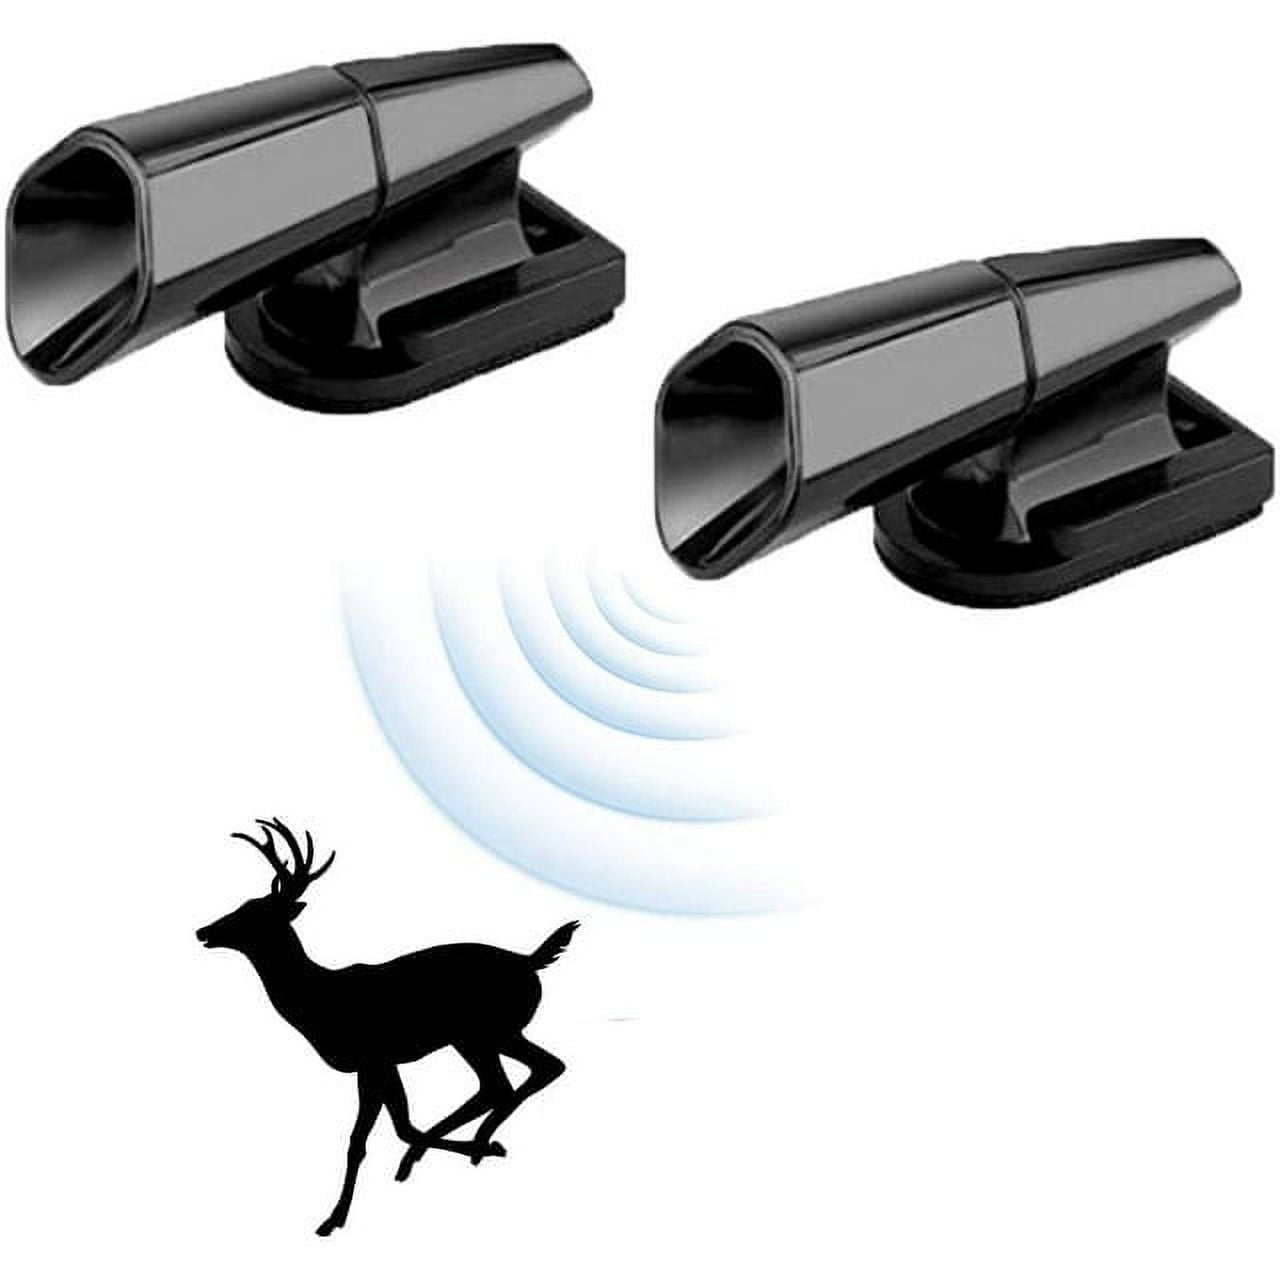 Pack of 2 Deer Whistles Wild Animal Warning Devices for Cars Car